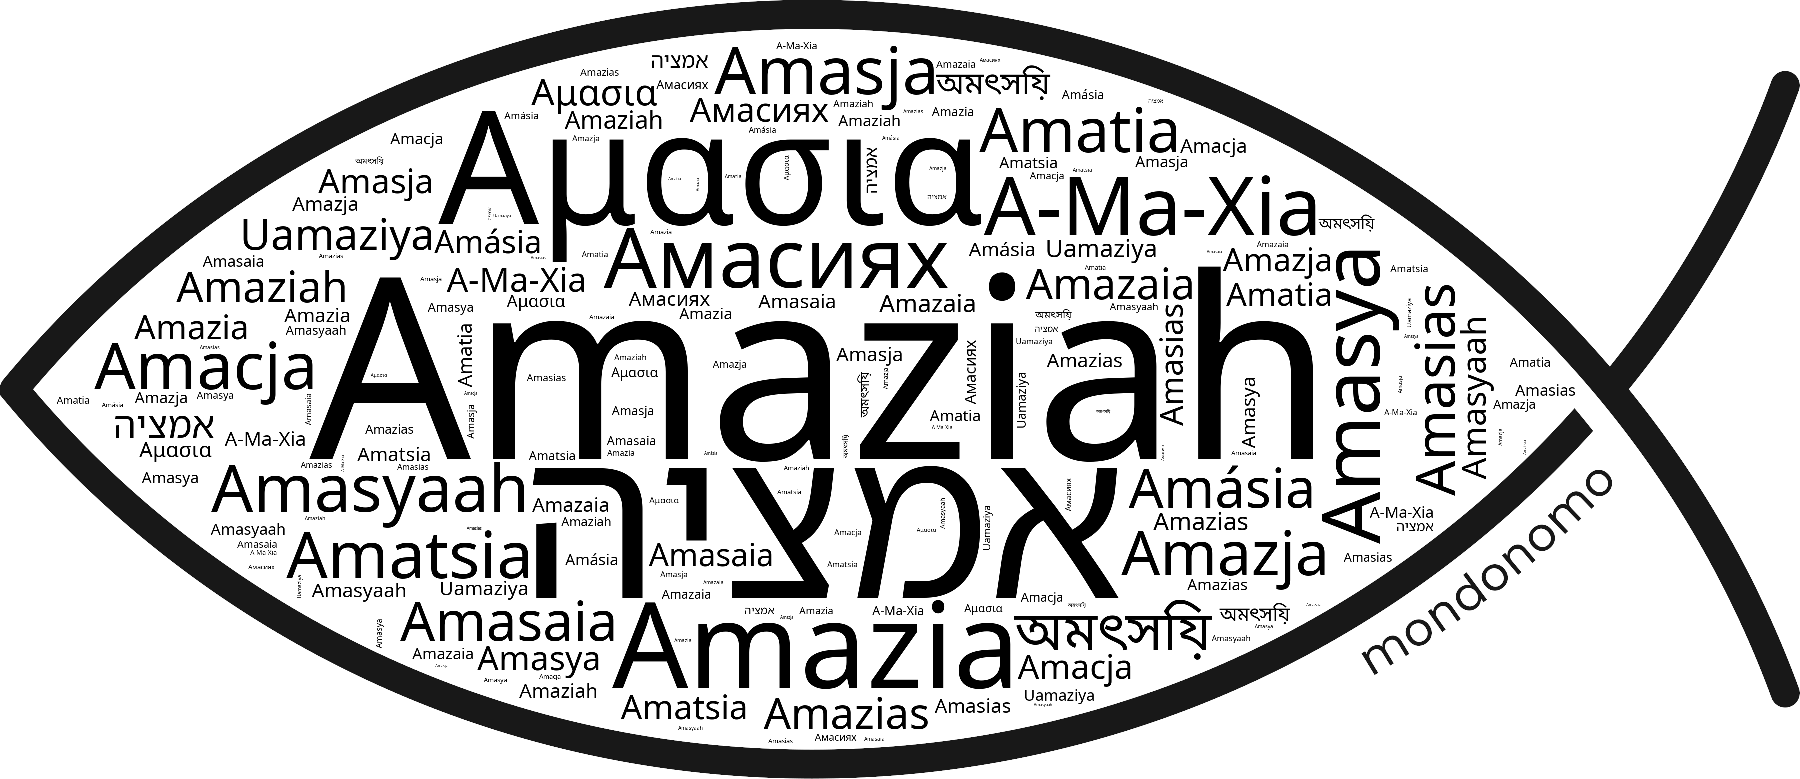 Name Amaziah in the world's Bibles